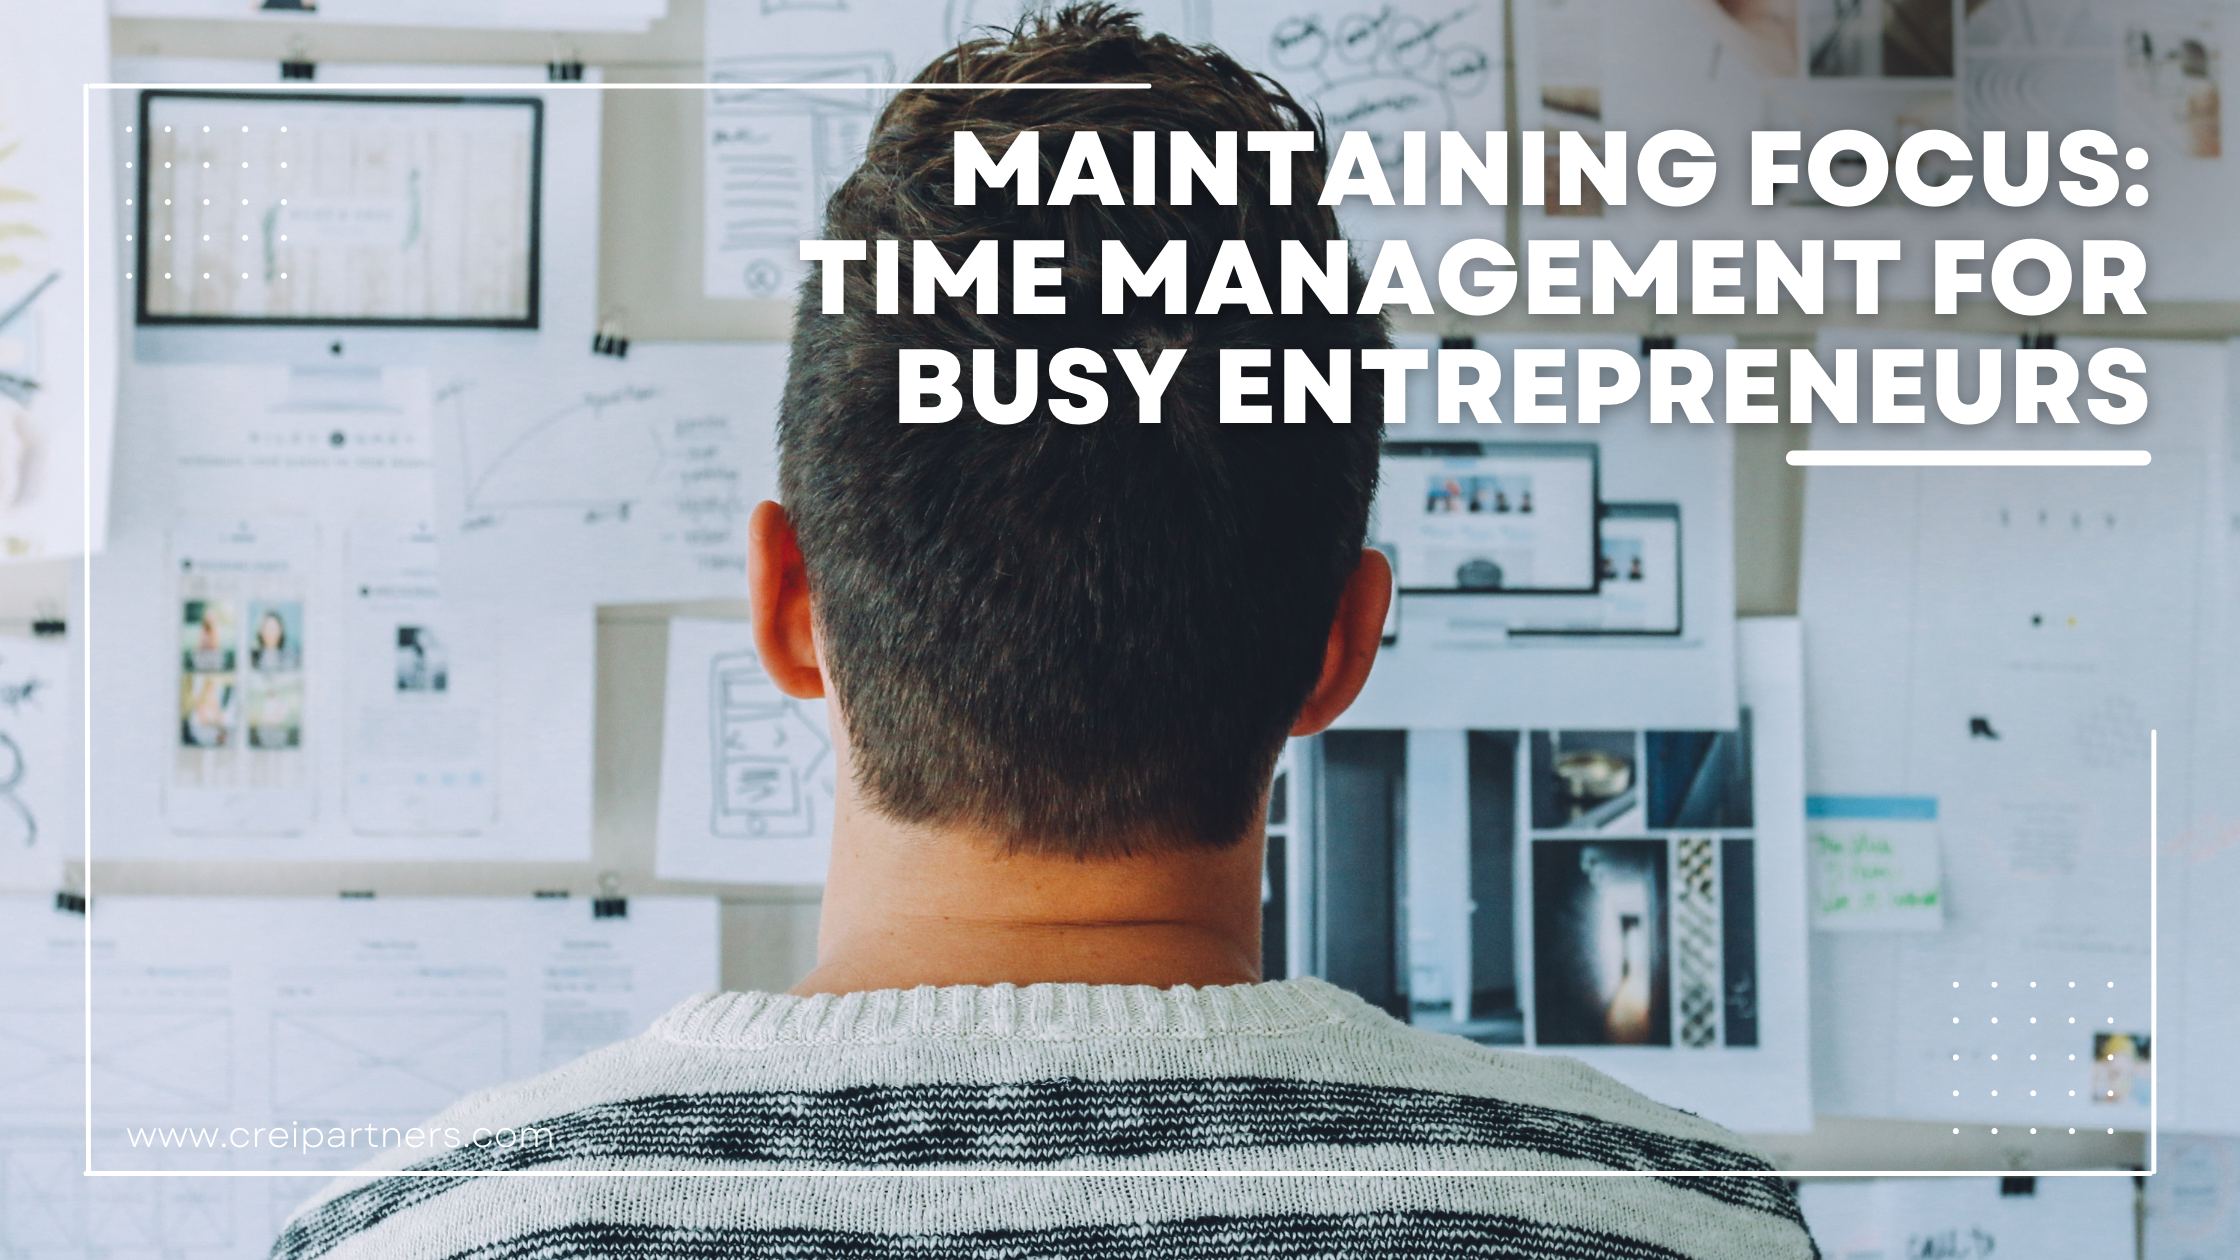 Maintaining Focus: Time Management for Busy Entrepreneurs